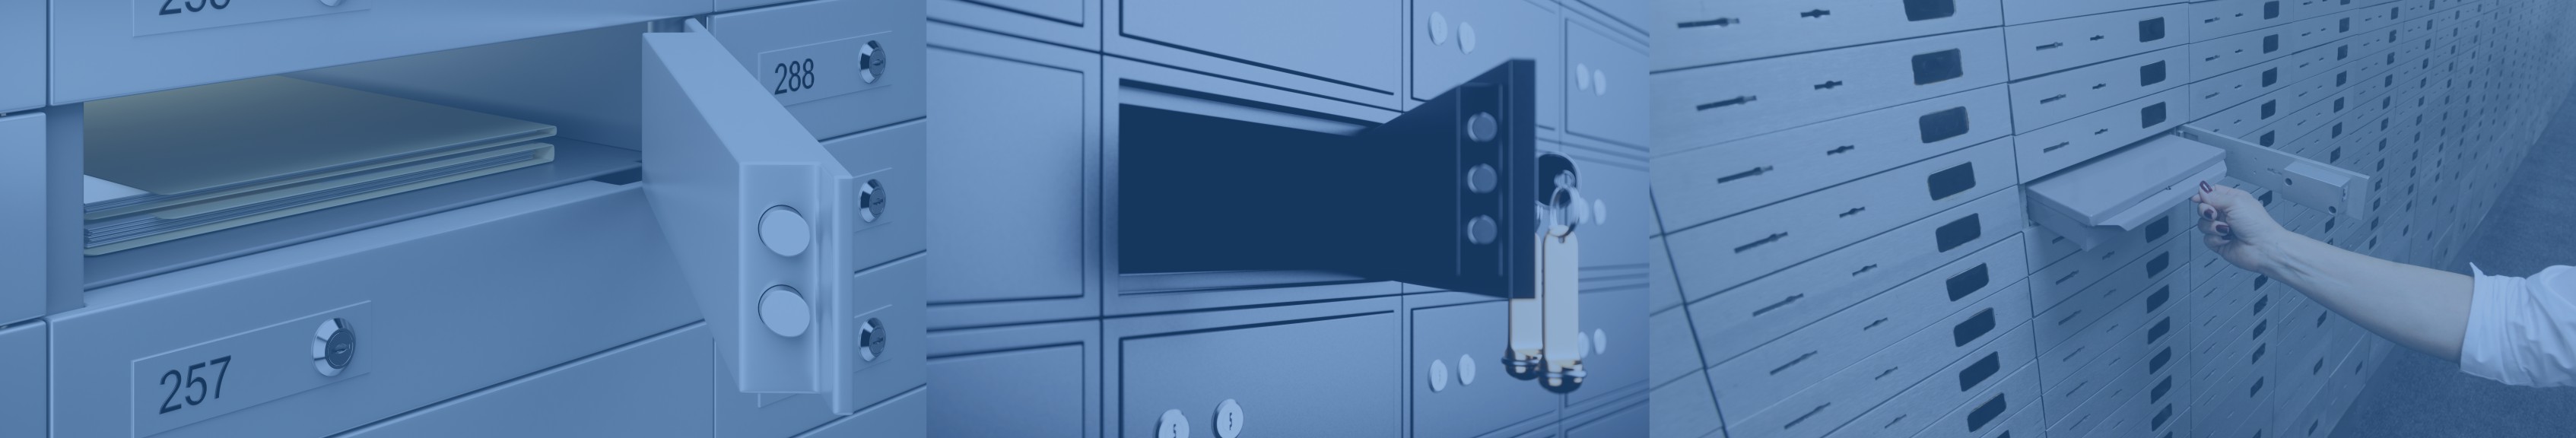 Safety Deposit Lockers for Hotels & Vault Rooms